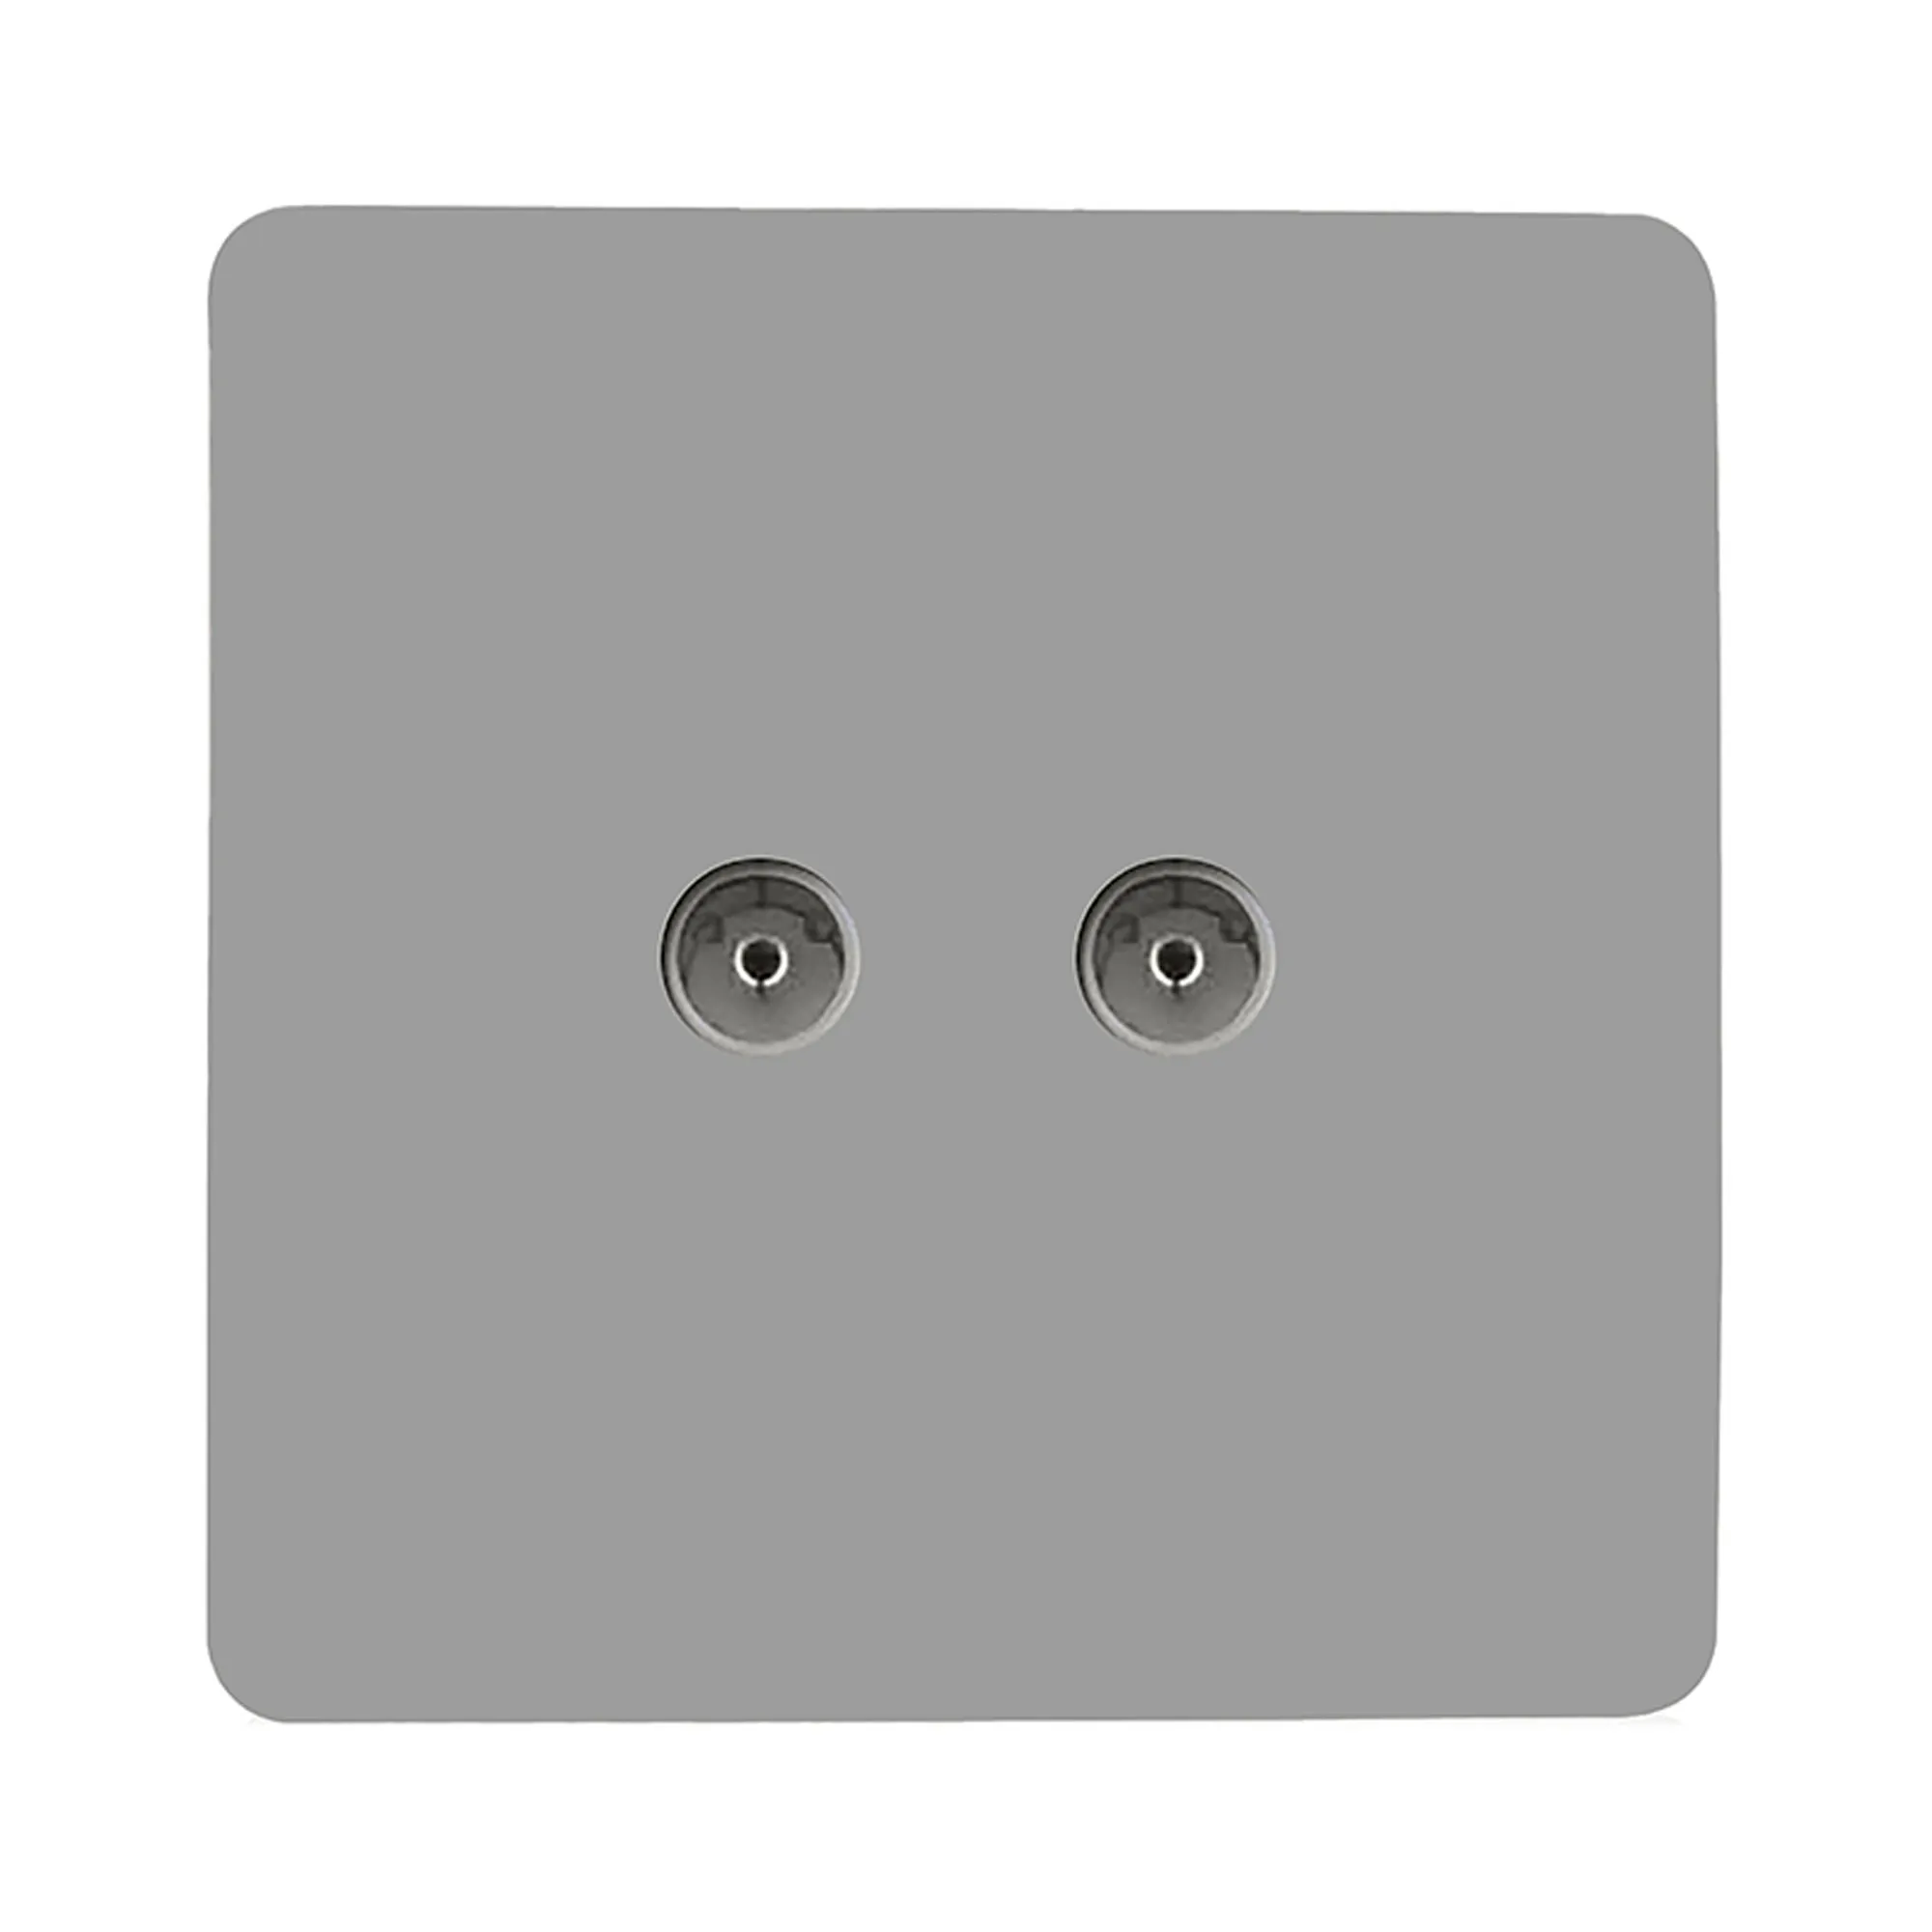 Twin TV Co-Axial Outlet Light Grey